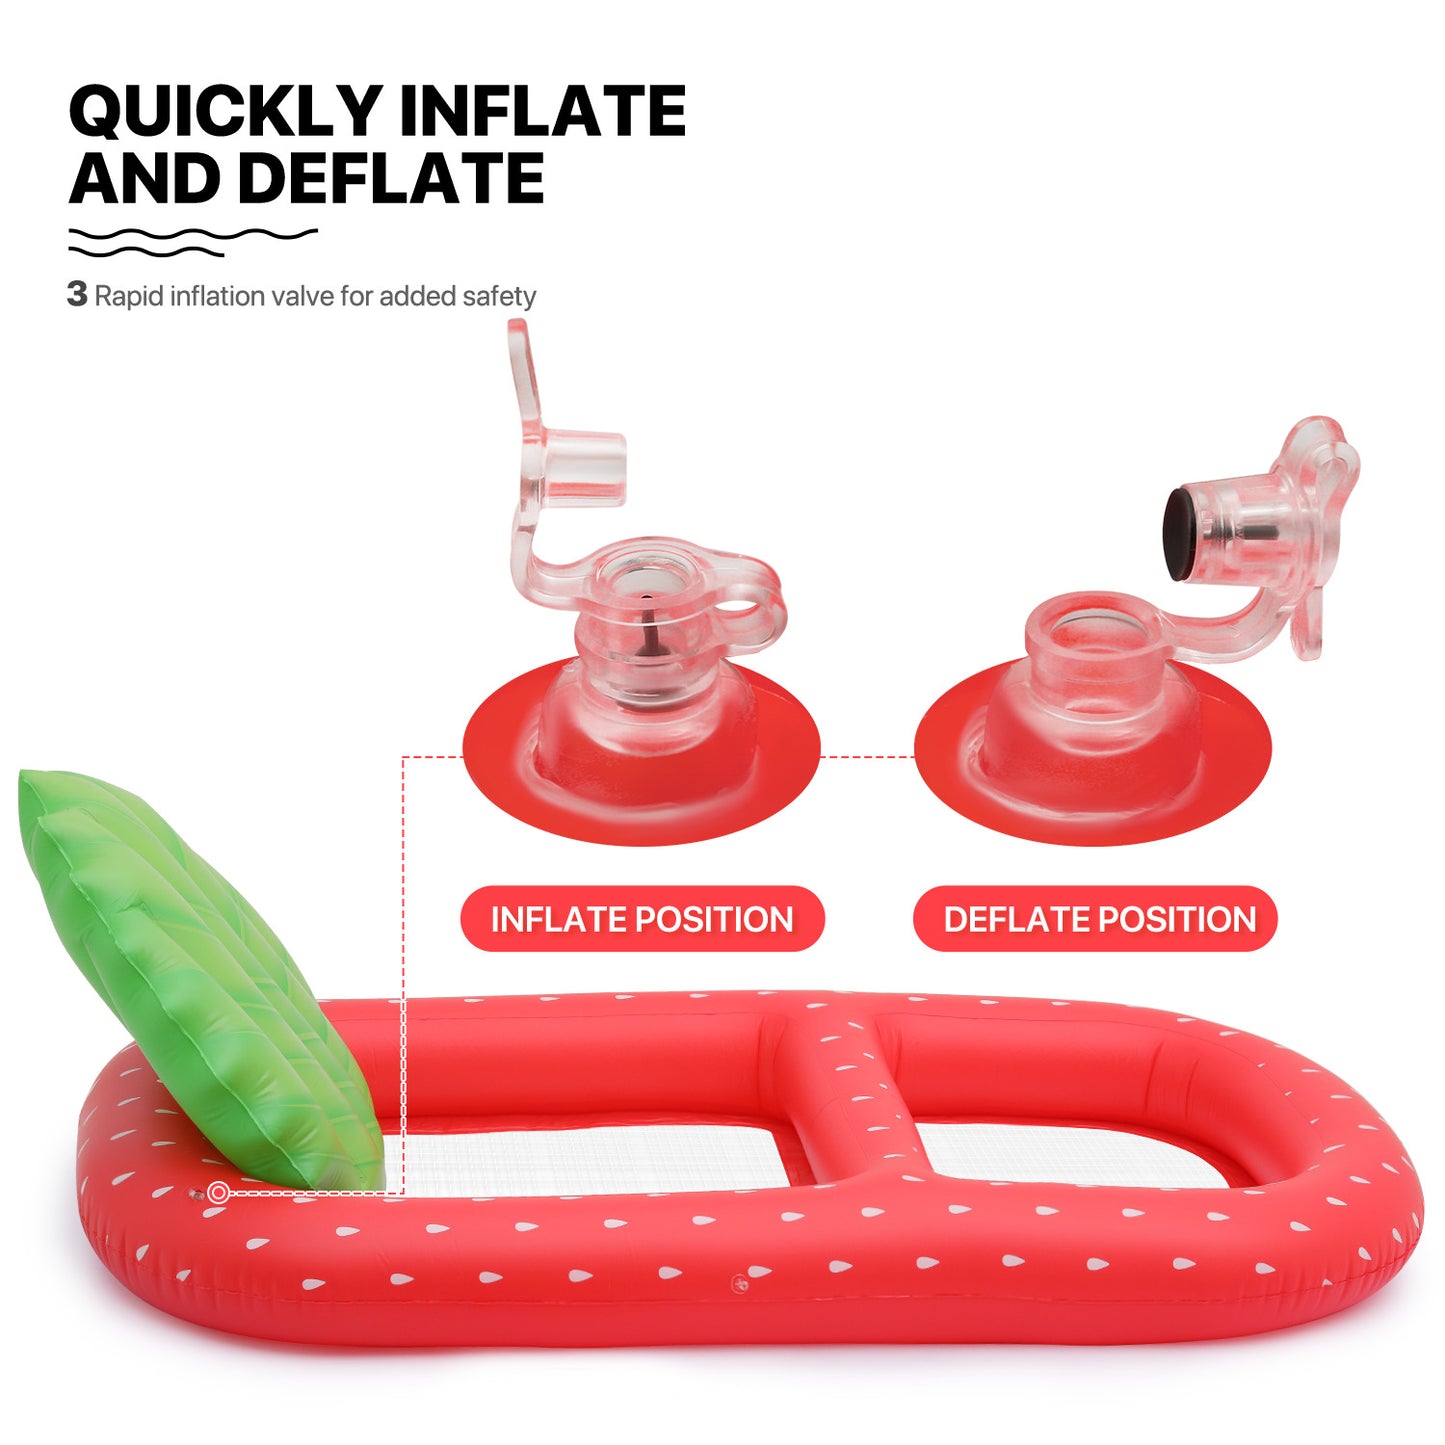 inflatable product-reclining chair-strawberry